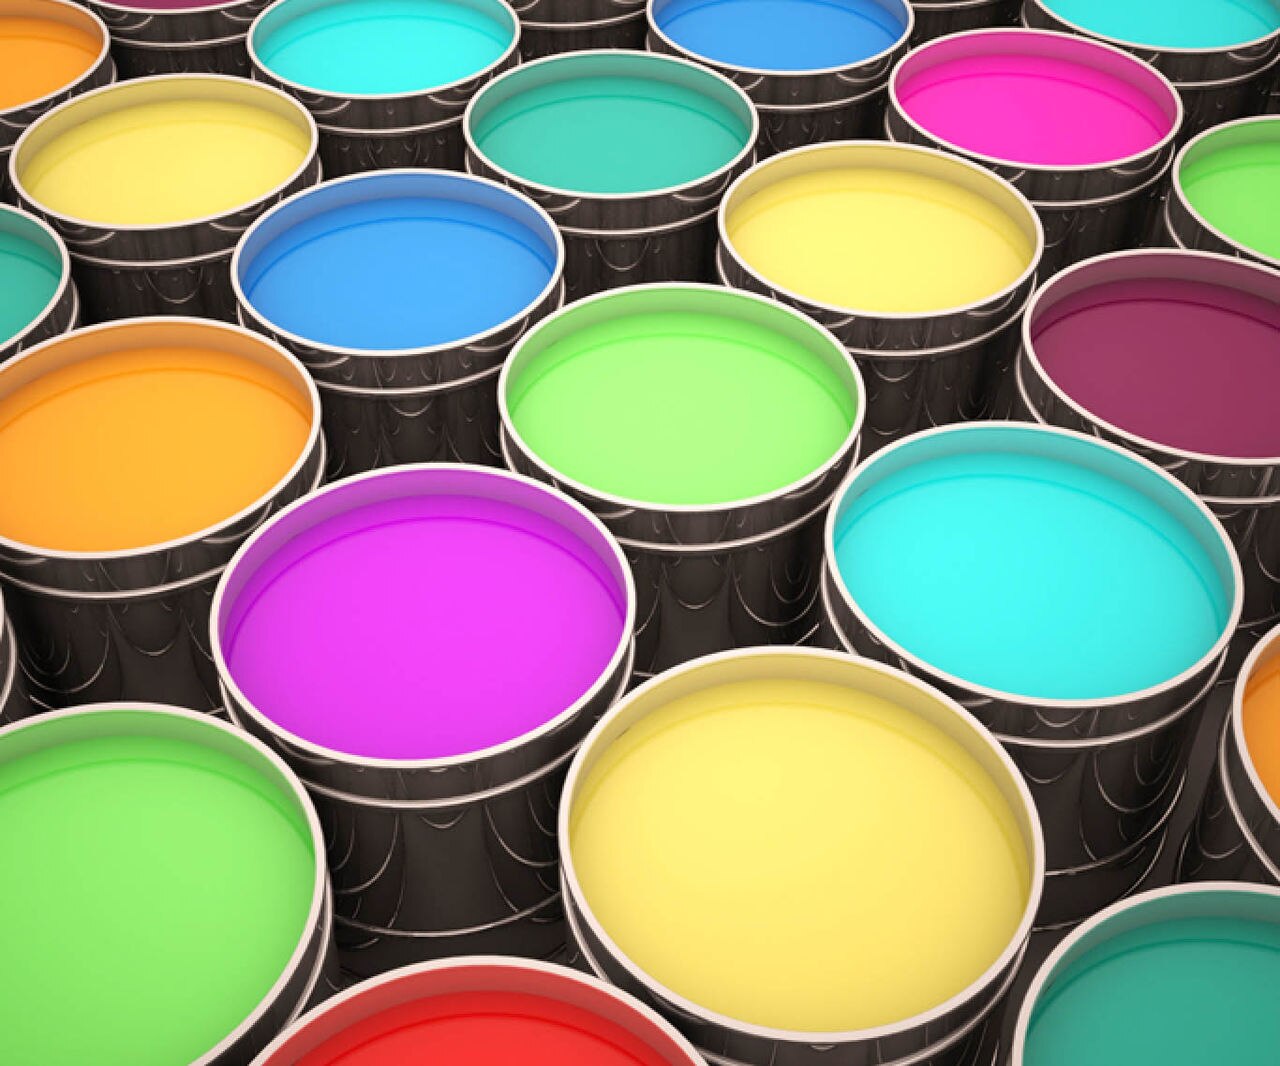 open cans of paint in multiple colors